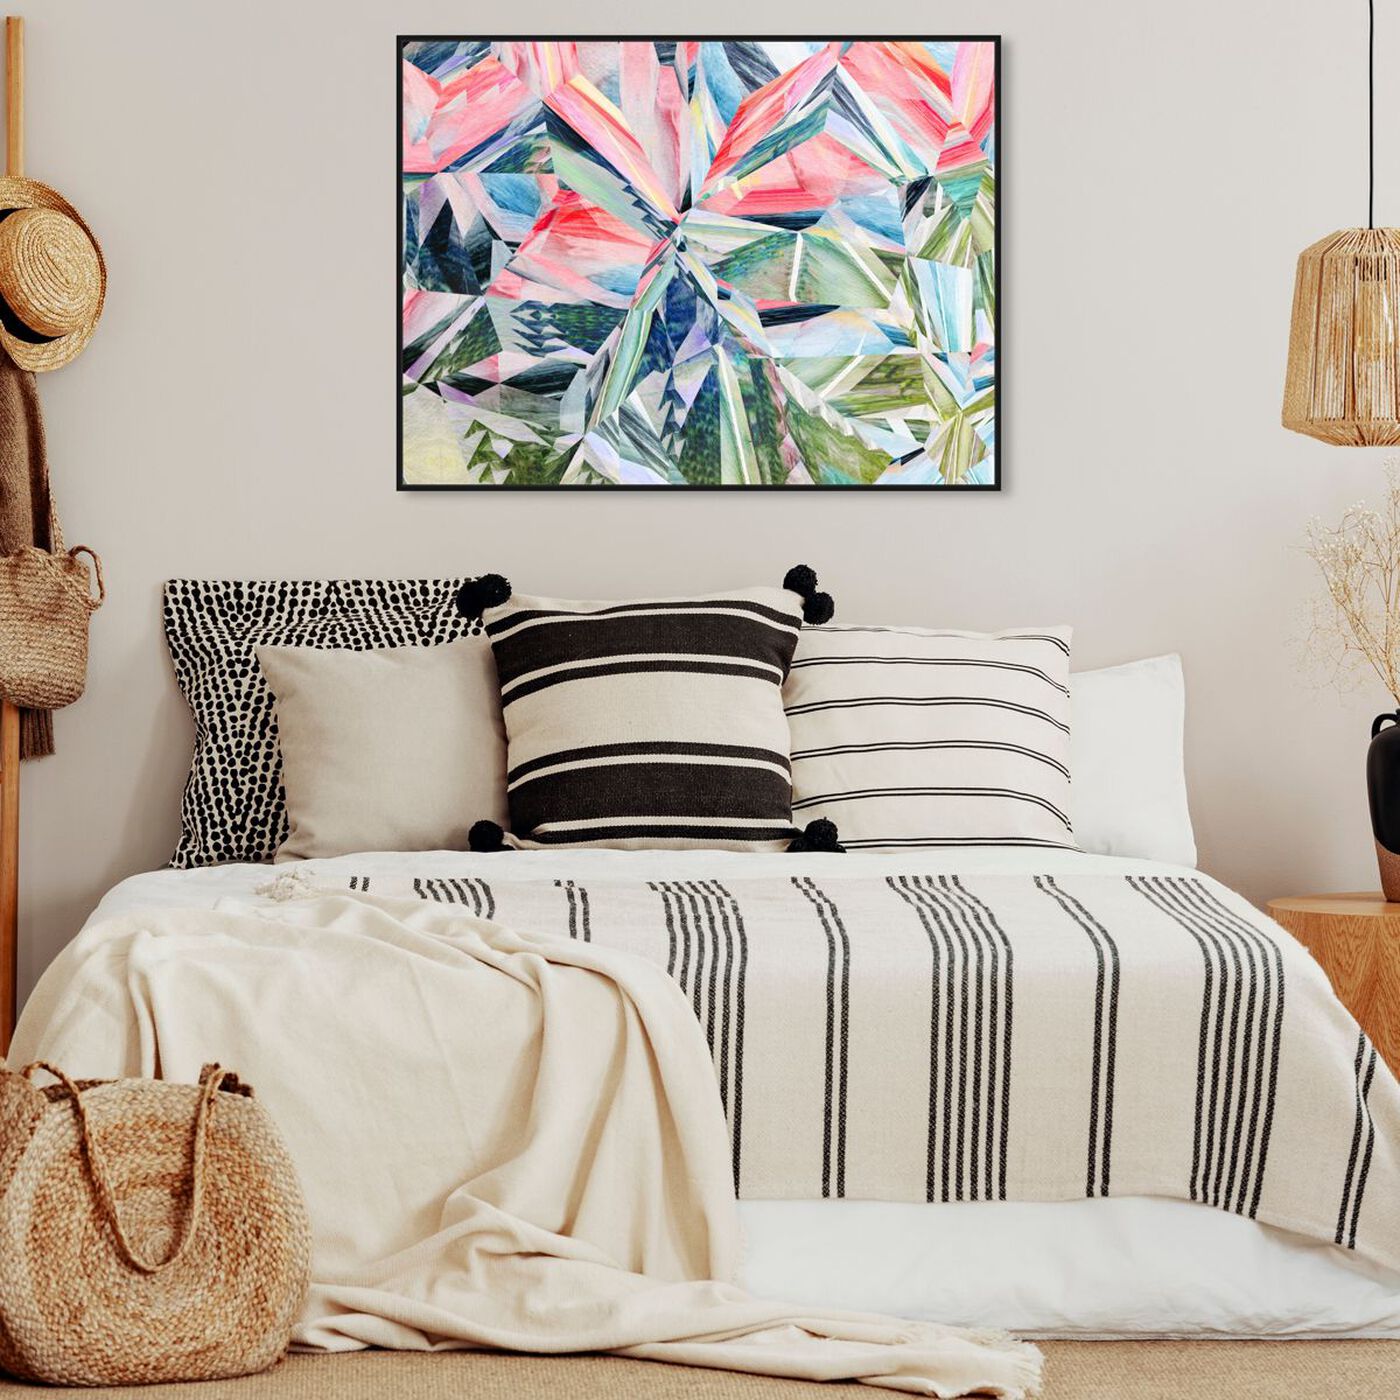 Hanging view of Right Choice featuring abstract and geometric art.